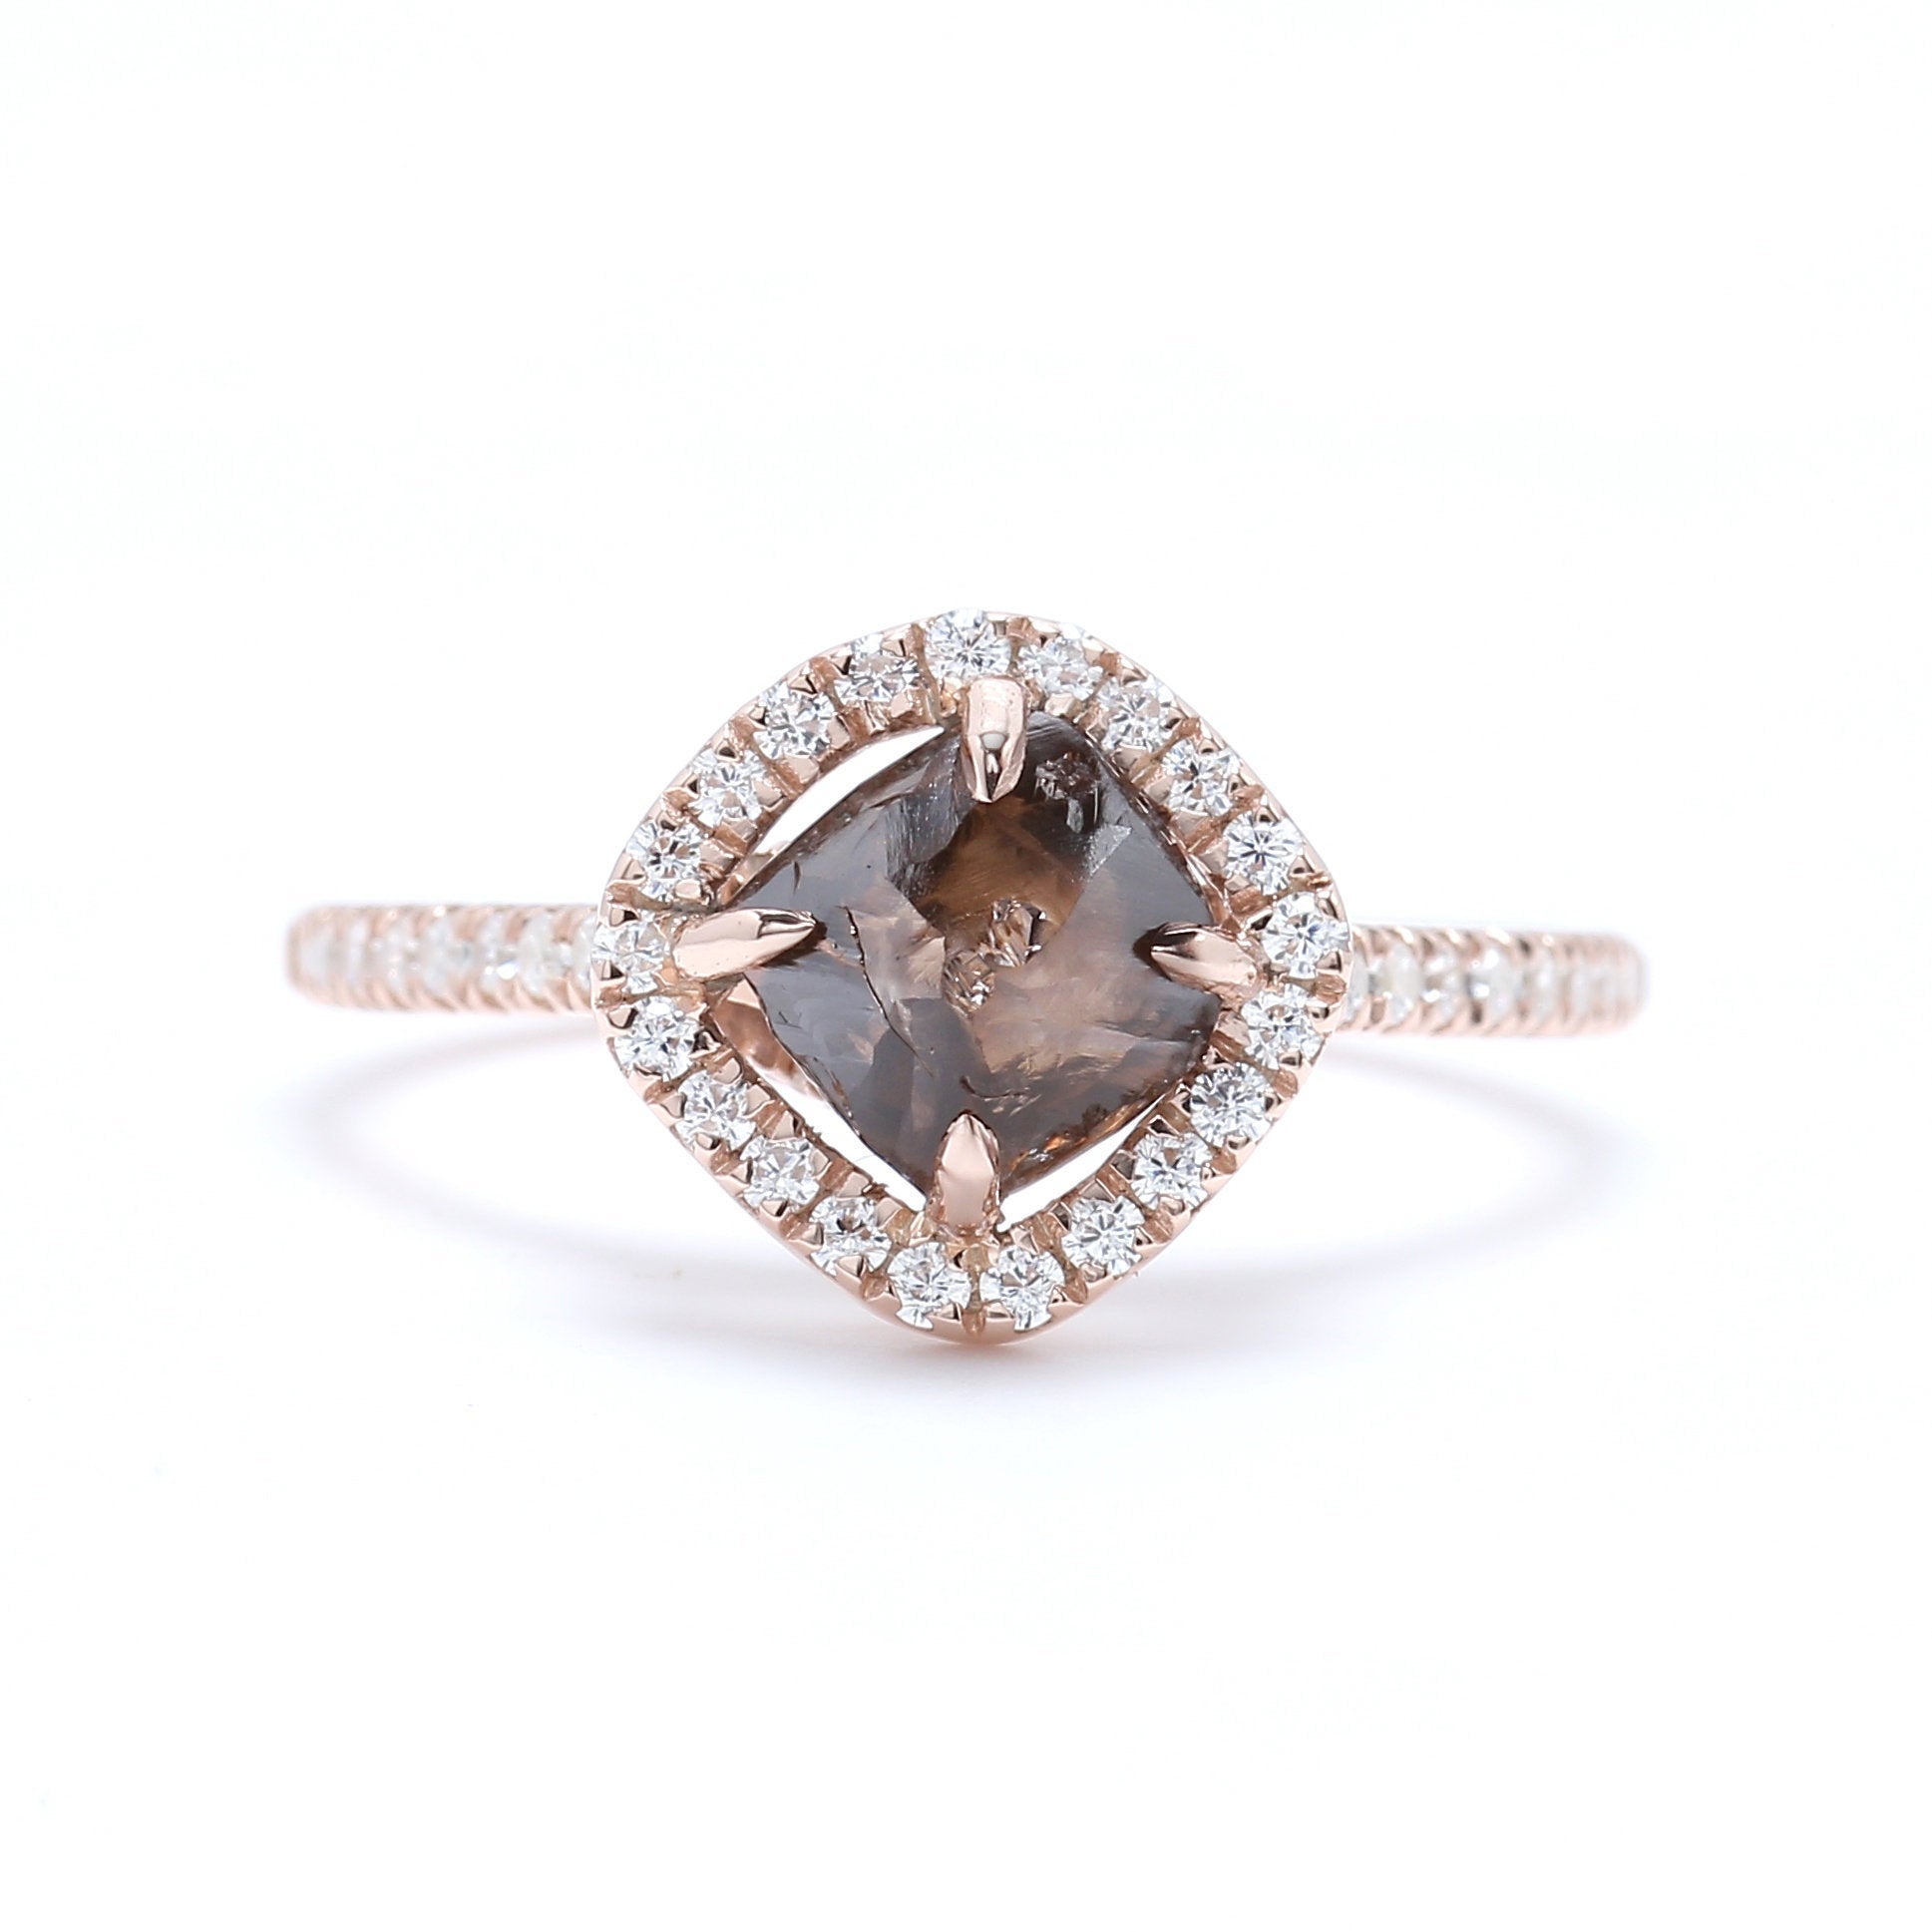 Rough Brown Color Diamond Ring 2.09 Ct 6.30 MM Rough Diamond Ring 14K Solid Rose Gold Silver Engagement Ring Gift For Her QL3103